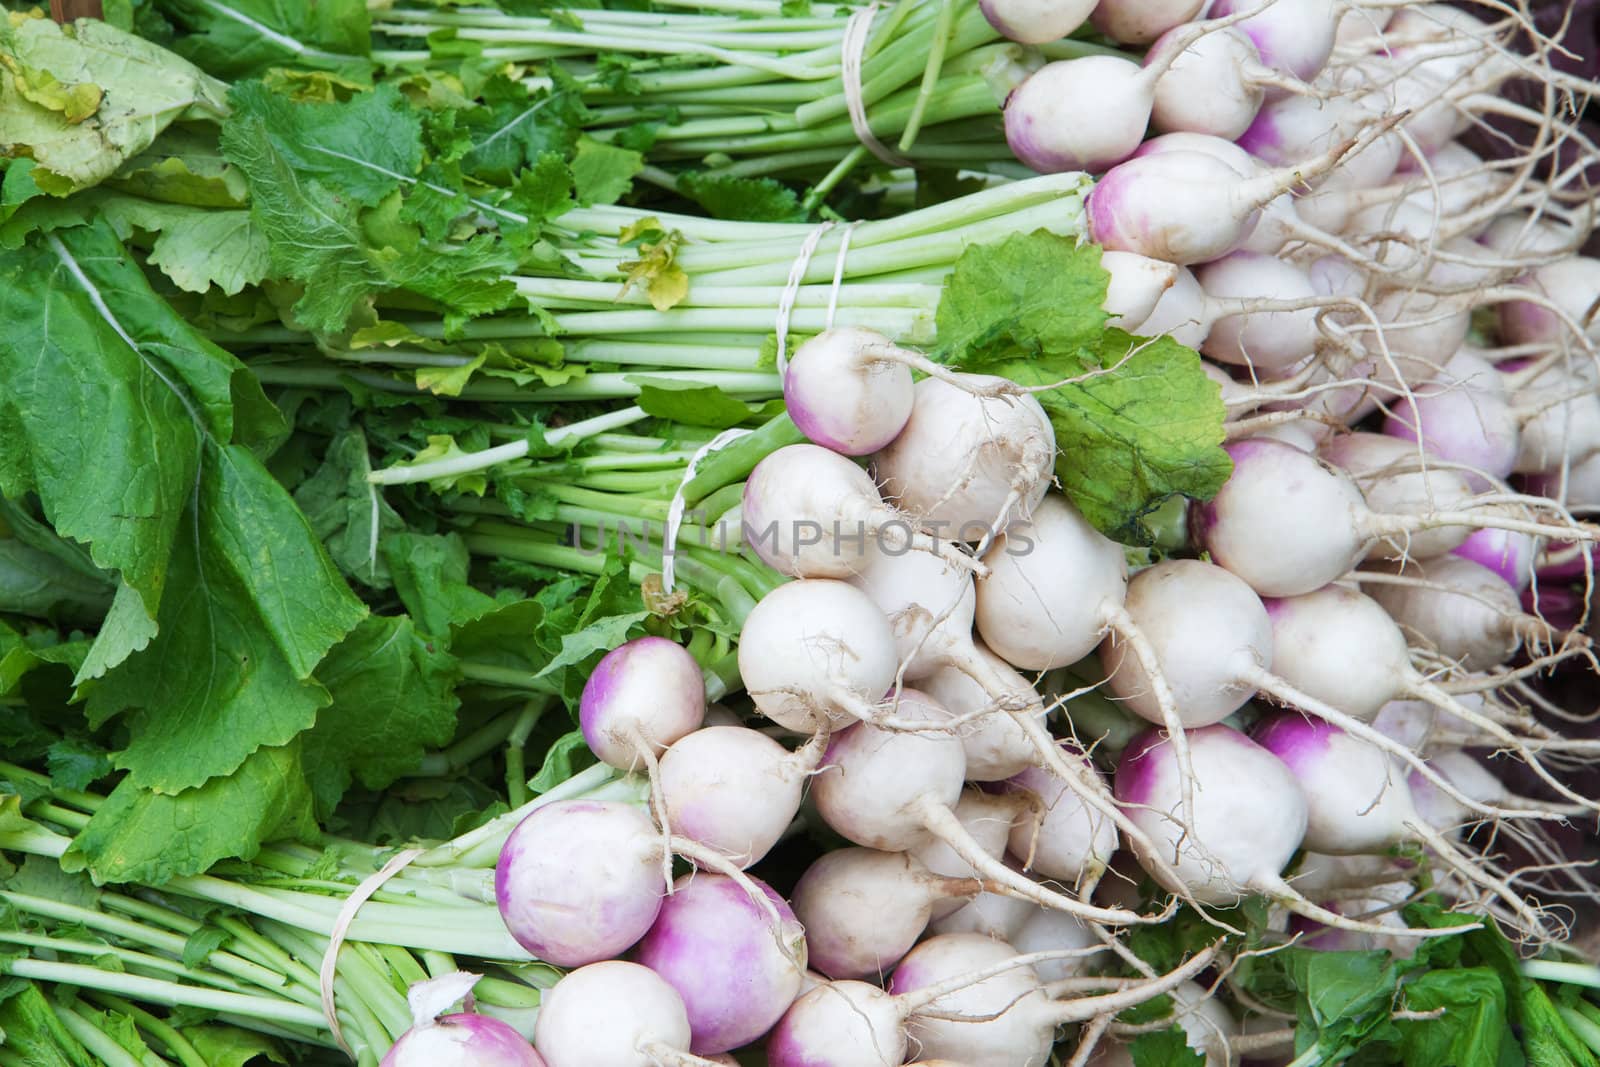 Pile of radishes with stalks by bobkeenan